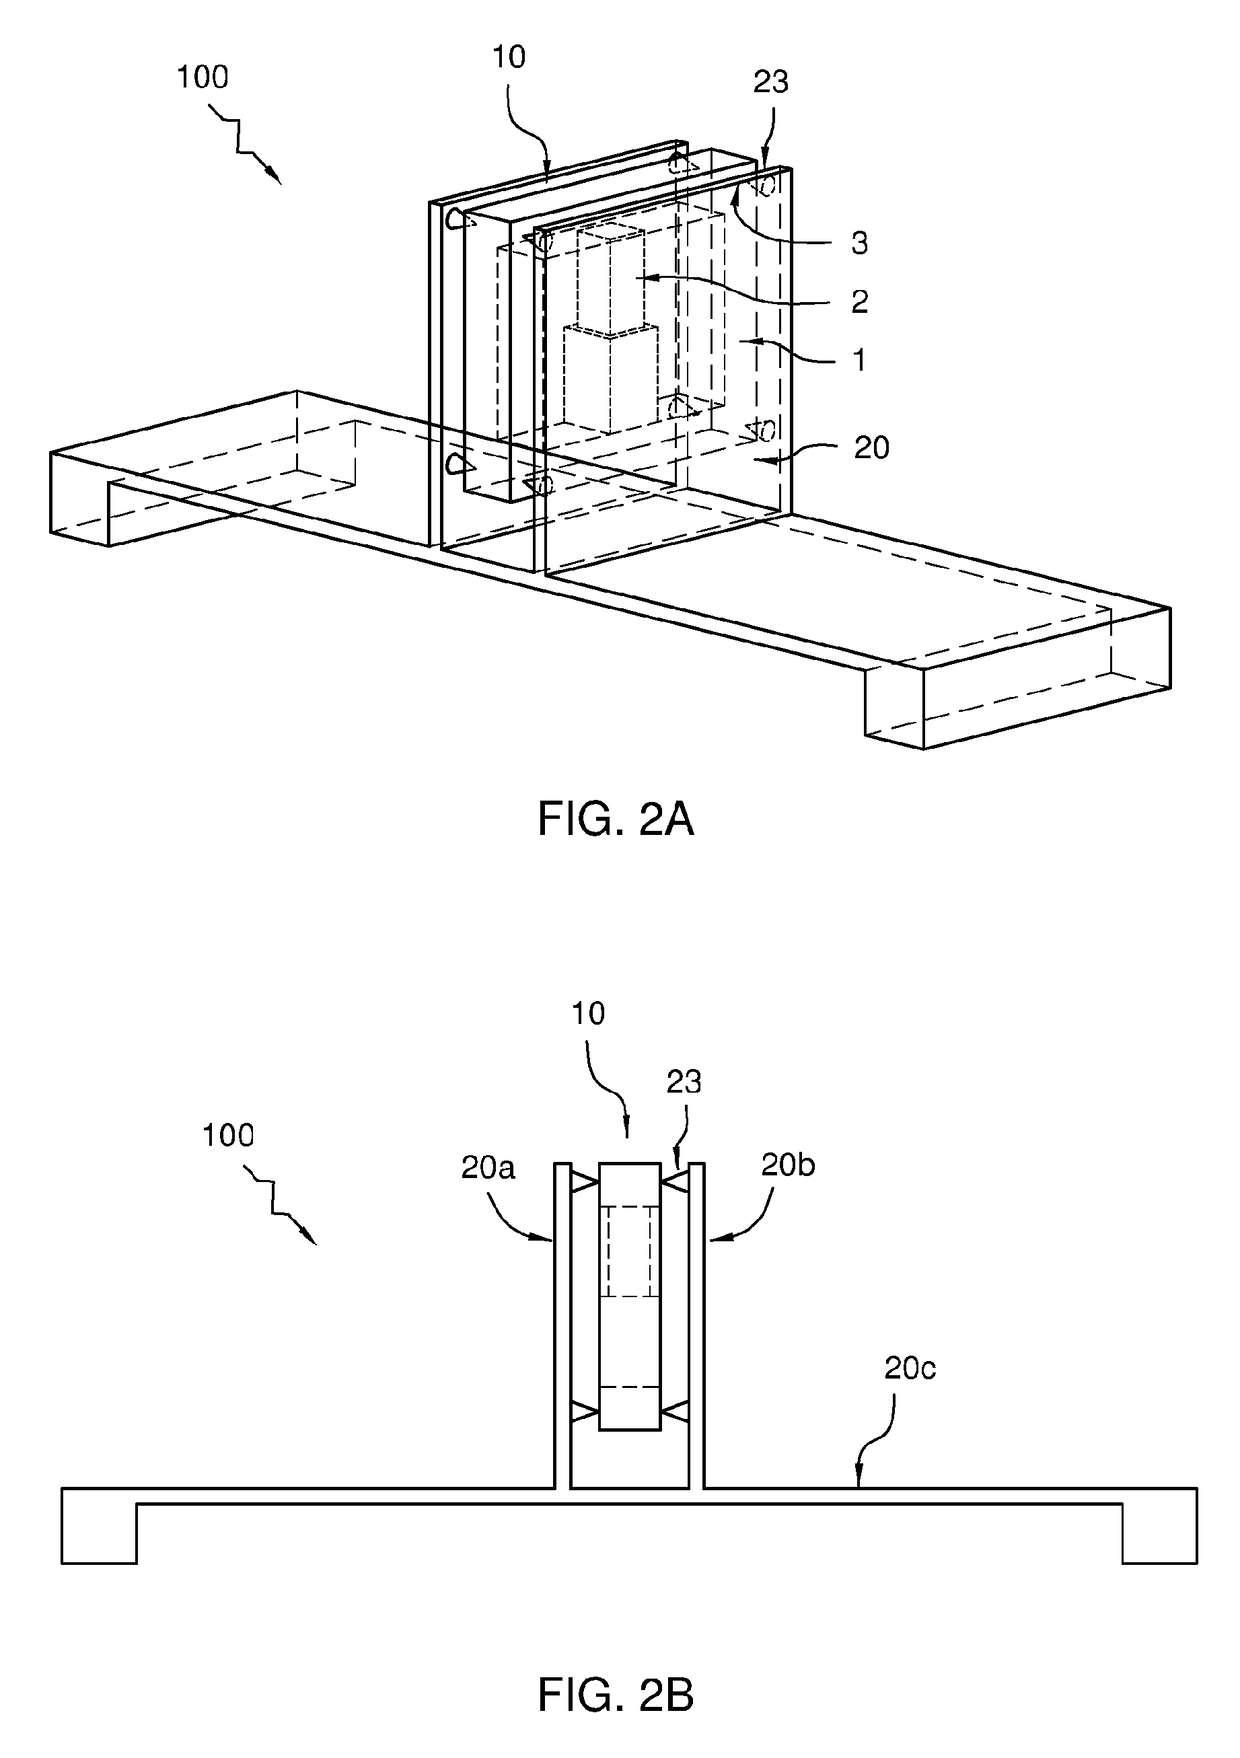 Actuator module for actuating a load